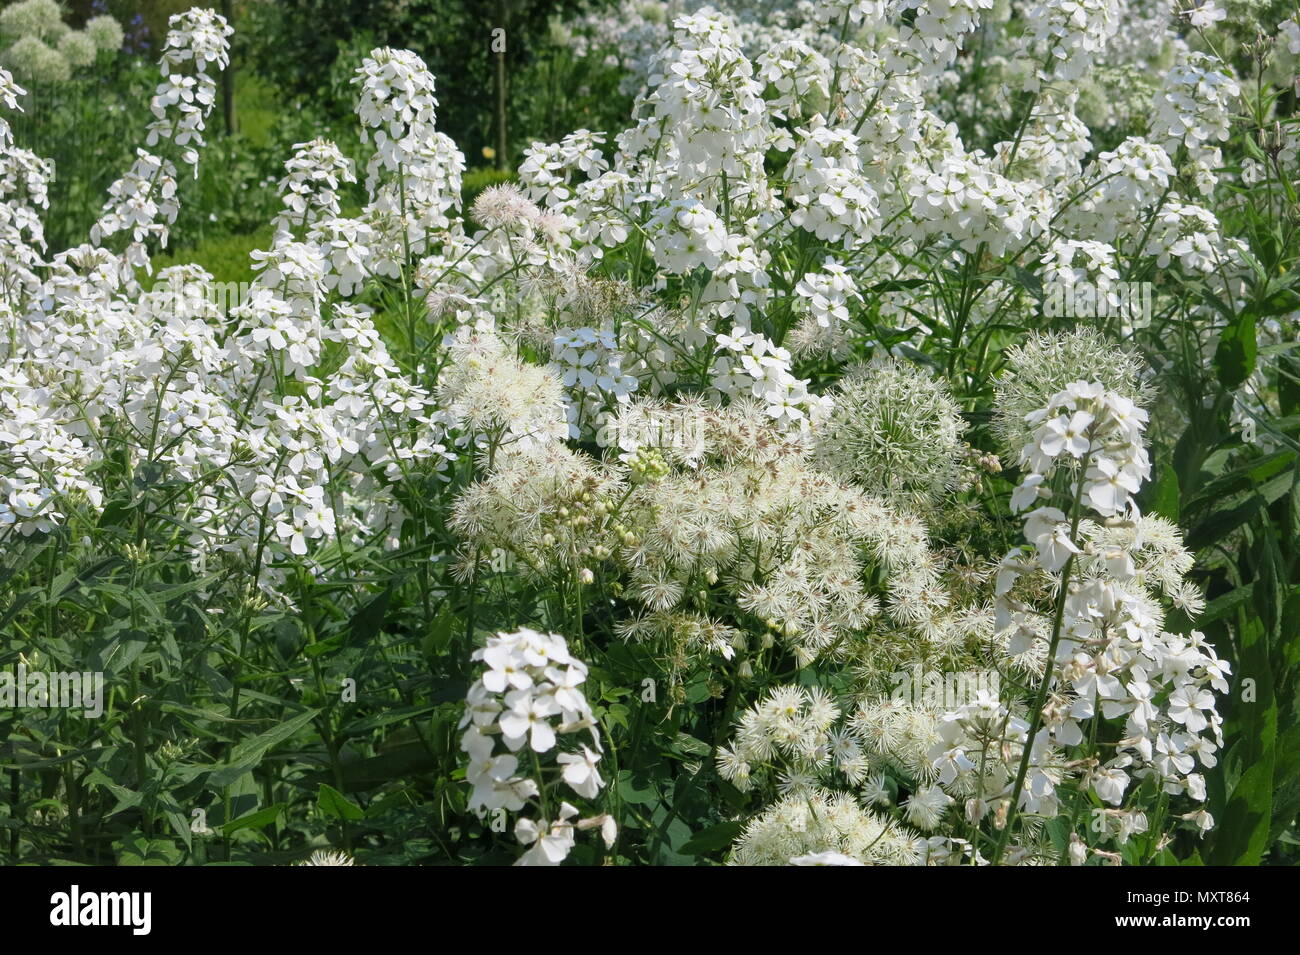 A close-up view of the billowing white flowers in the White Garden at Sissinghurst Castle, designed by plantswoman Vita Sackville-West Stock Photo